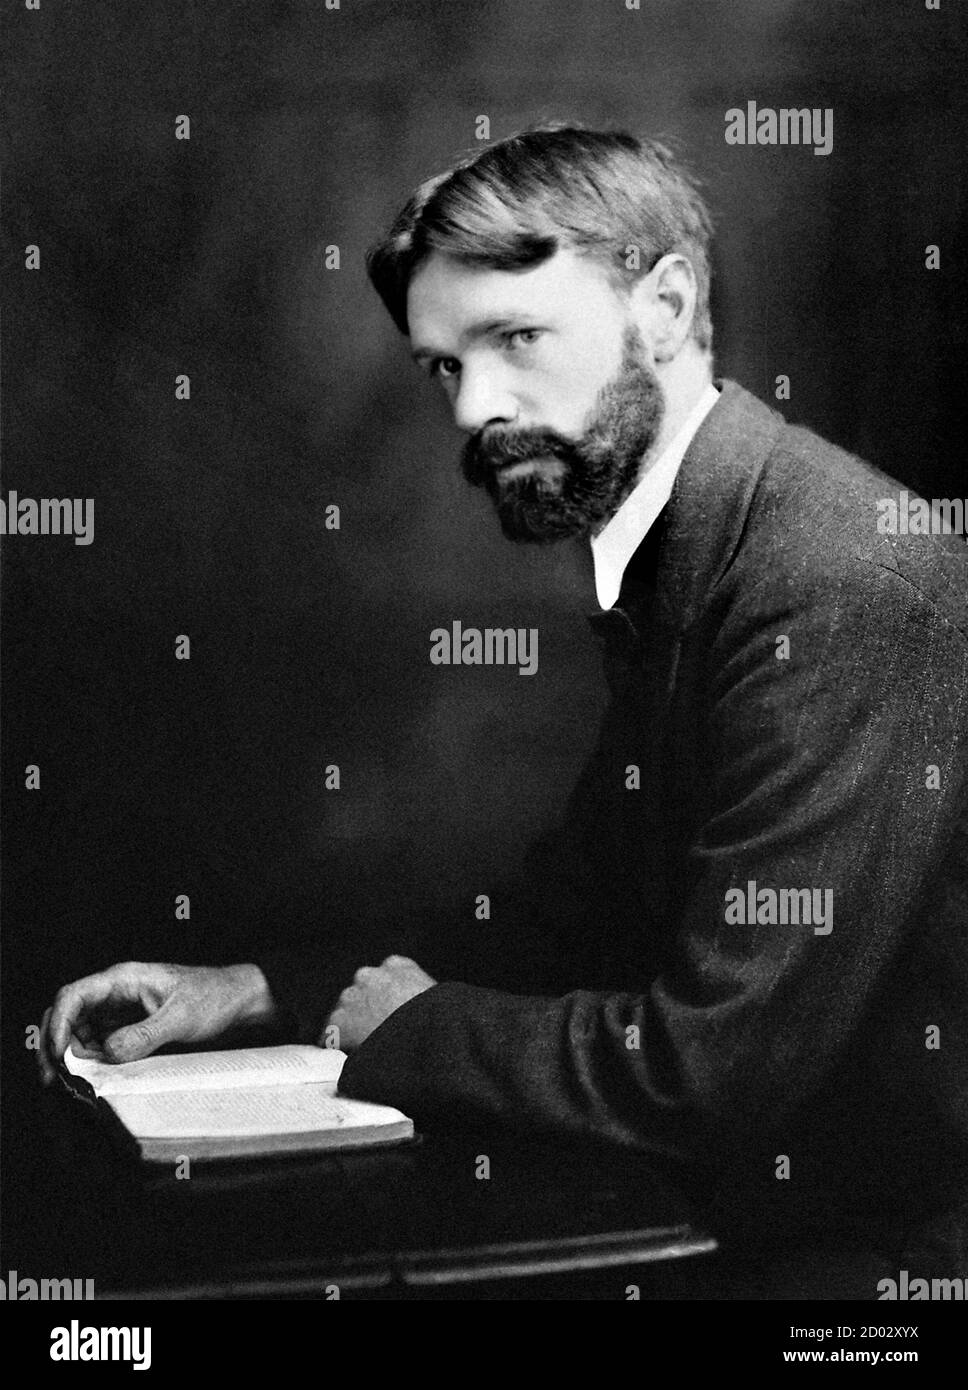 D. H. Lawrence / DH Lawrence. Portrait of the English writer and poet, David Herbert Lawrence (1885-1930), c.1915 Stock Photo